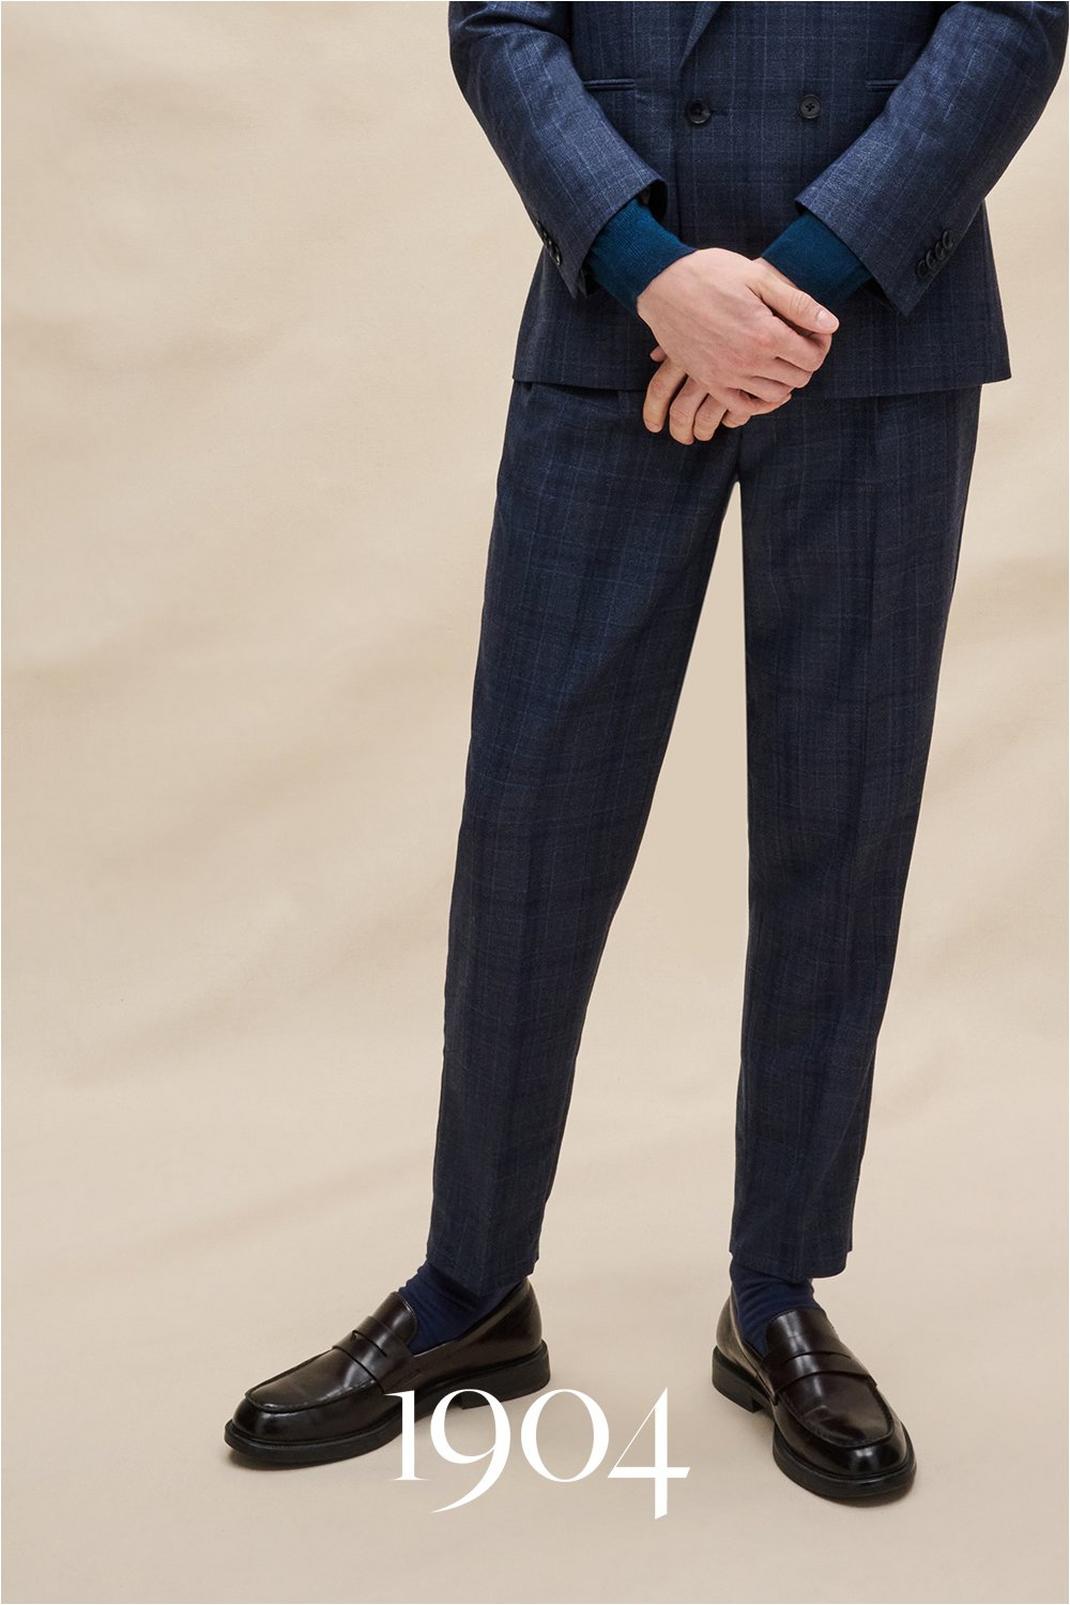 148 1904 Navy Tonal Check Tapered Suit Trouser image number 1